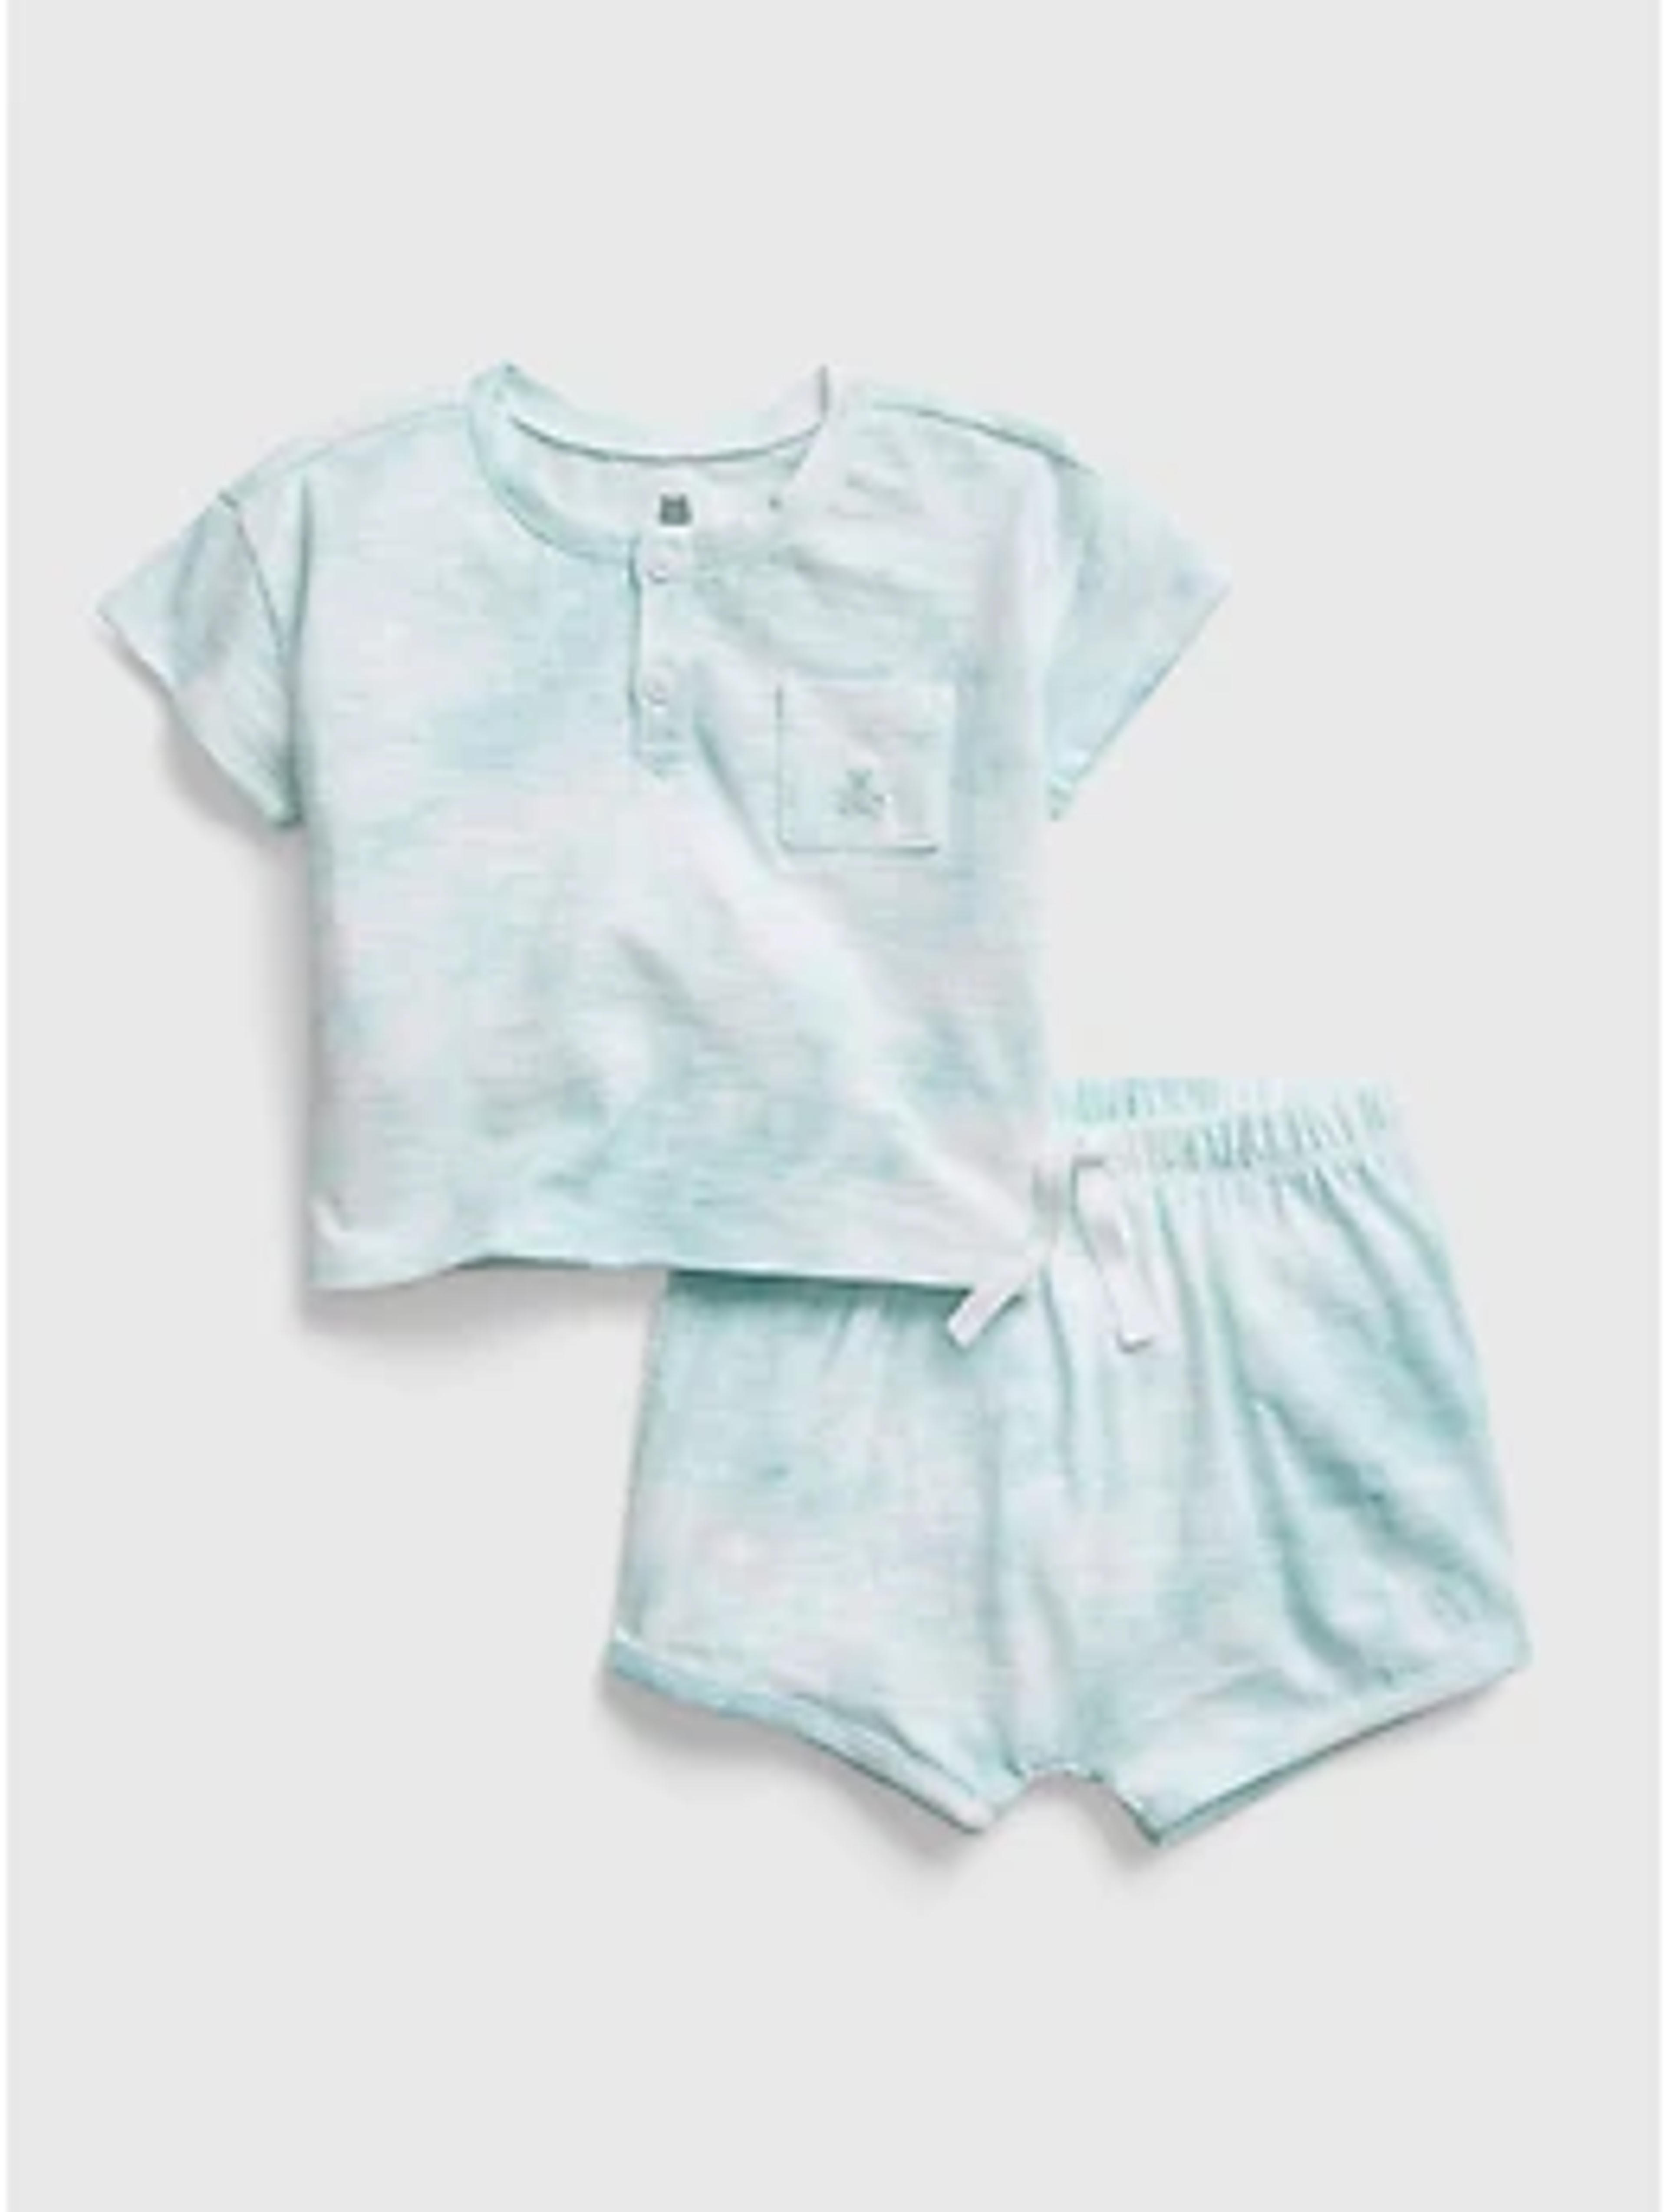 Baby 100% Organic Cotton Two-Piece Outfit Set